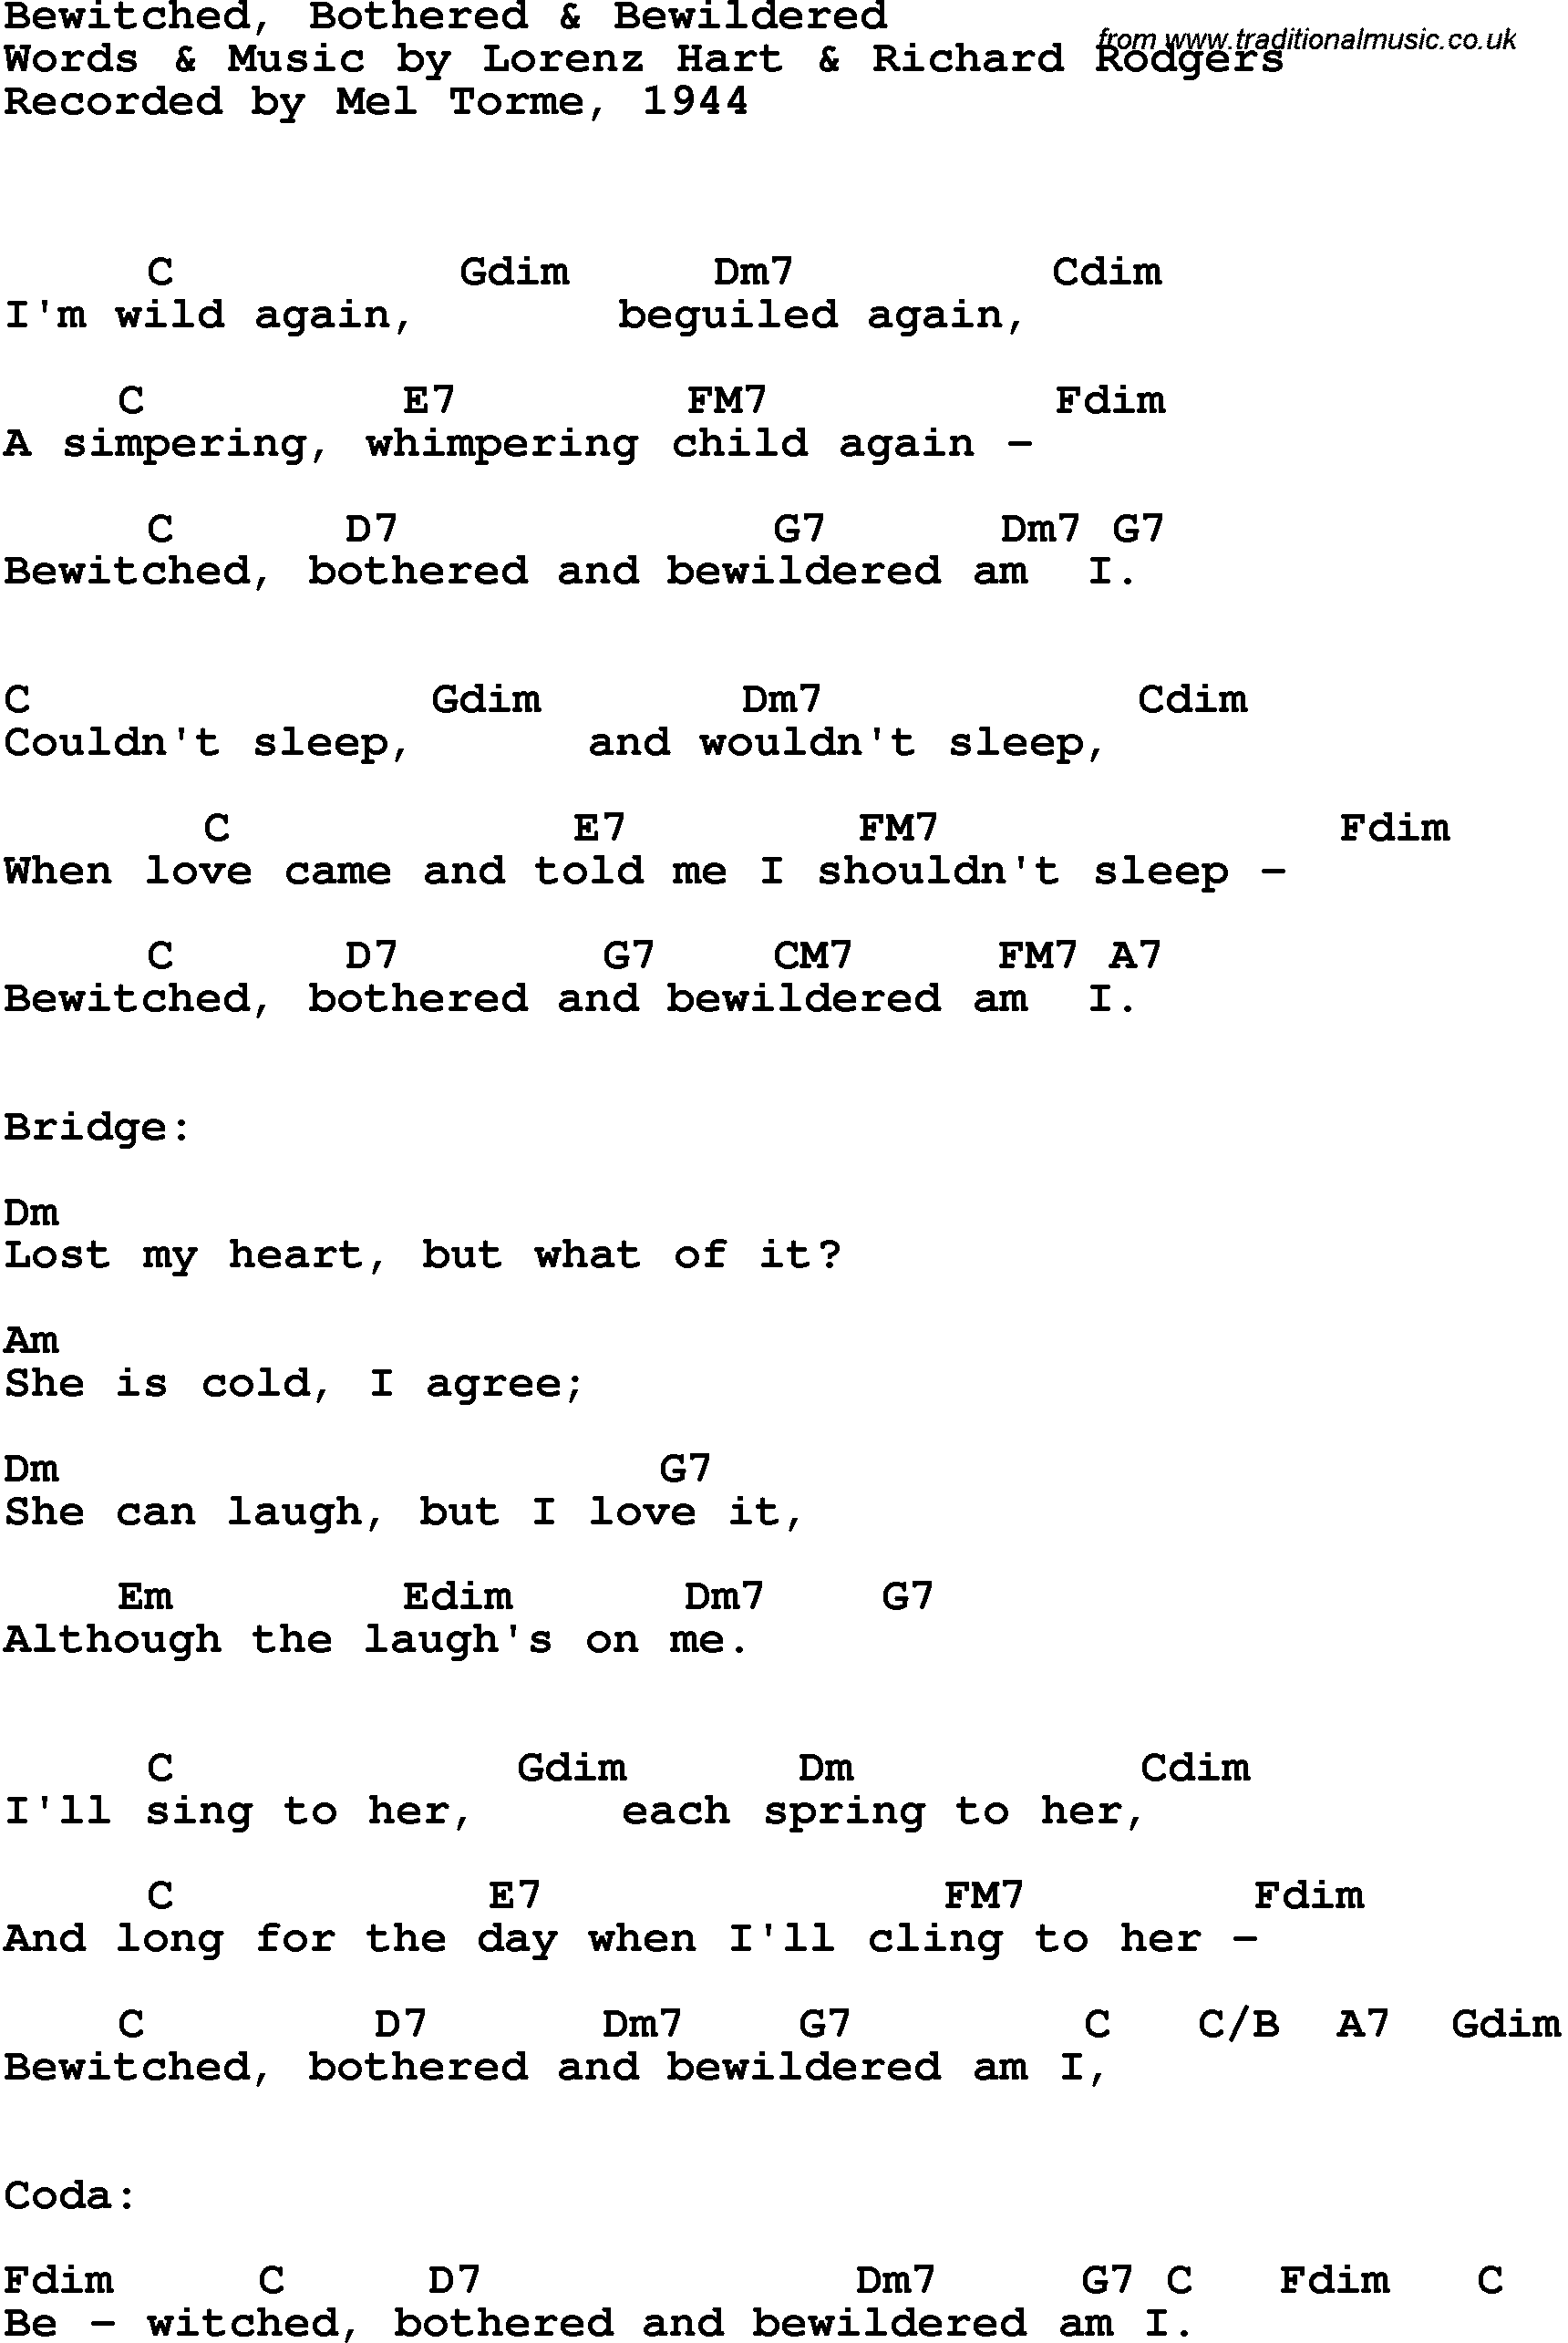 Song Lyrics with guitar chords for Bewitched, Bothered & Bewildered - Mel Tormé, 1944